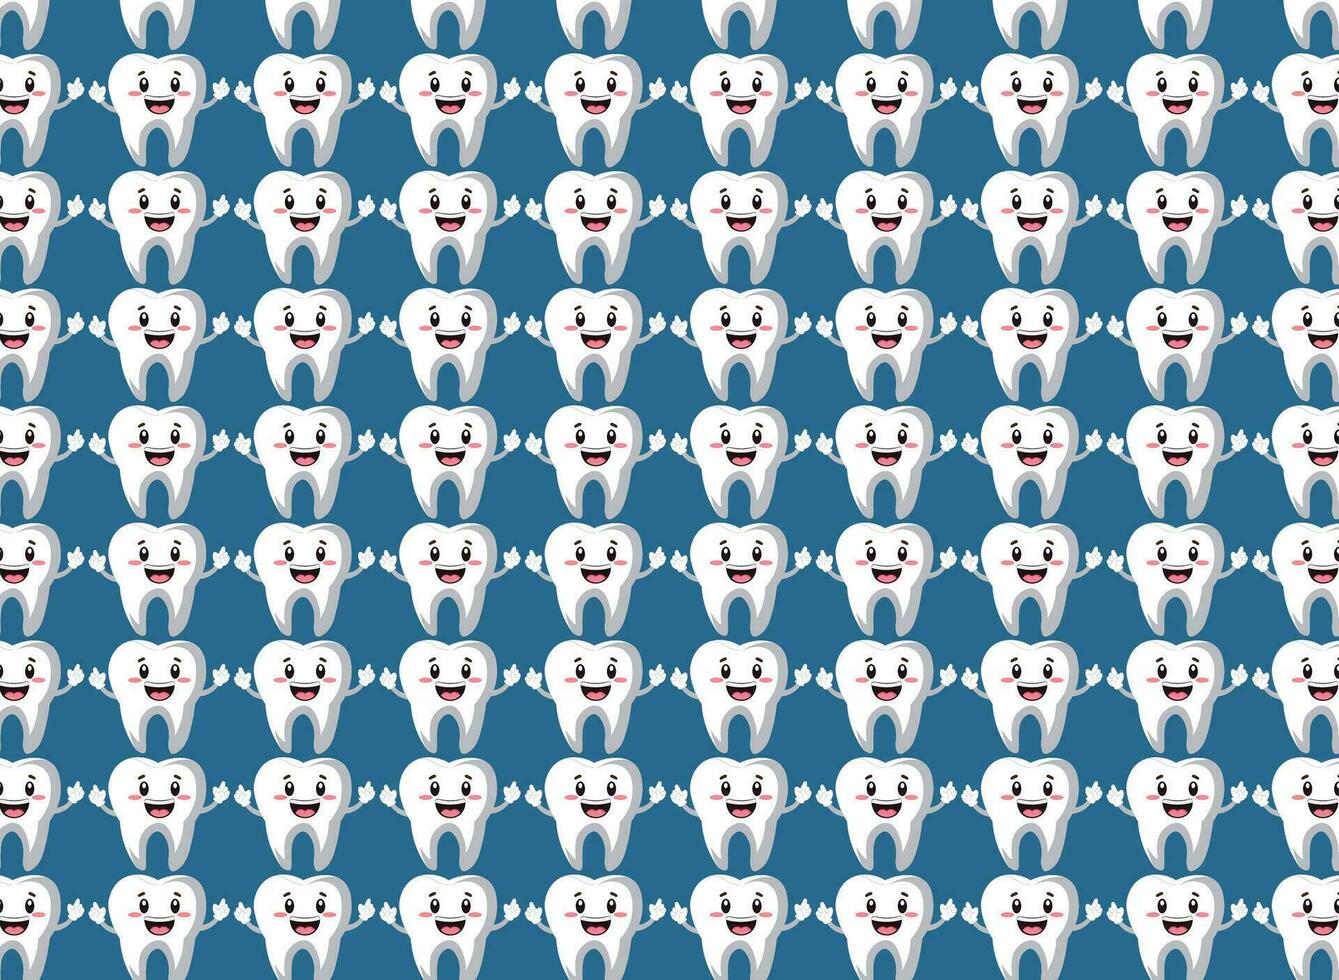 dentist pattern, tooth pattern, repetition, ideal for publications or backgrounds vector